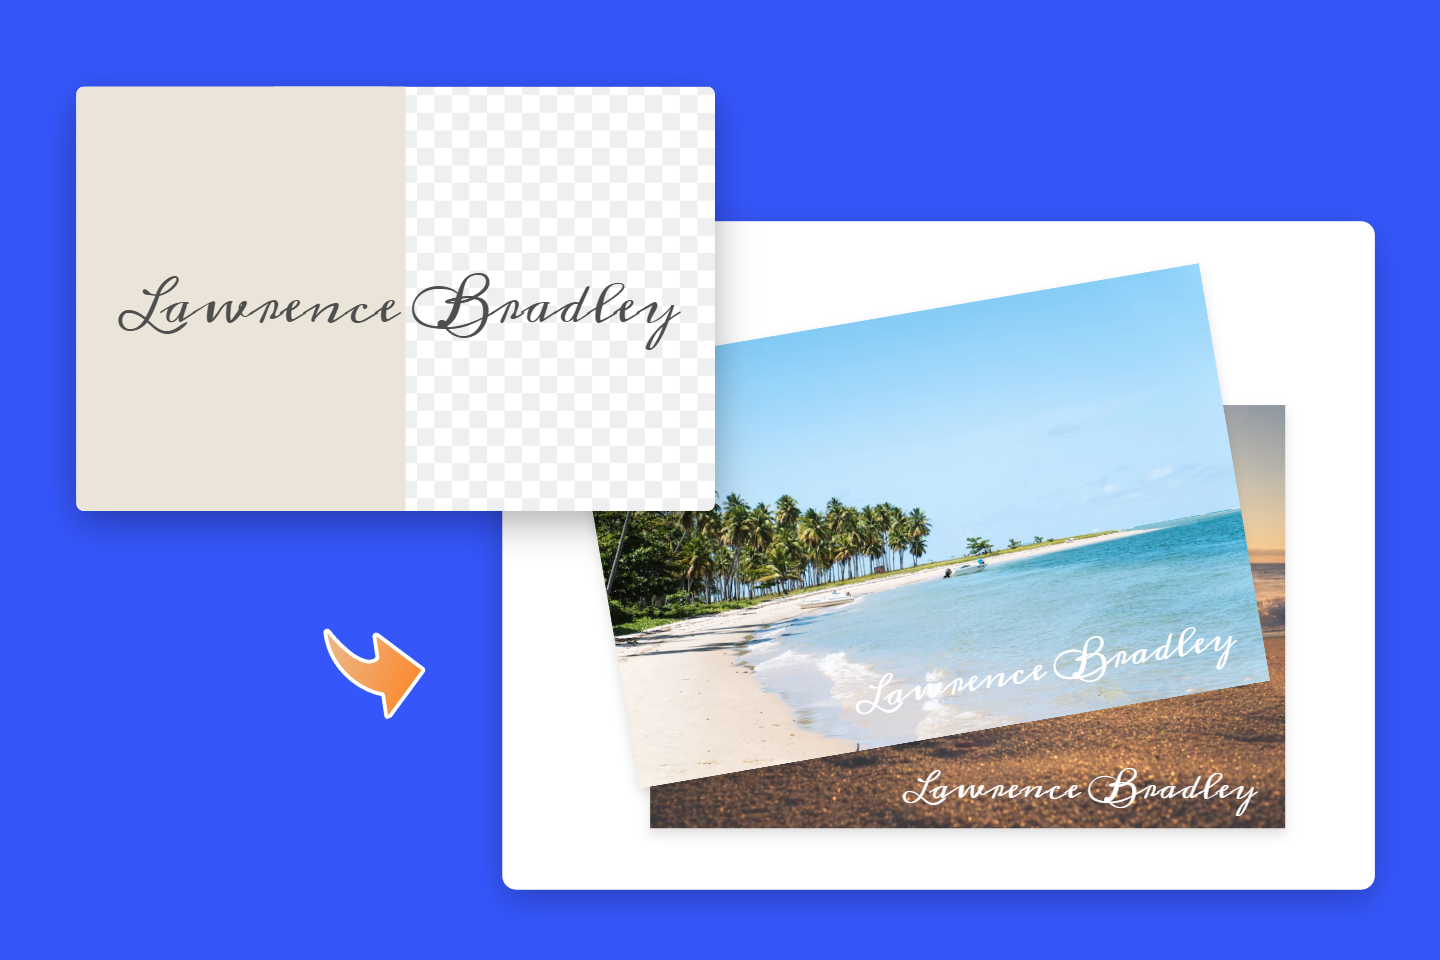 Convert signage into transparent and add to postcard